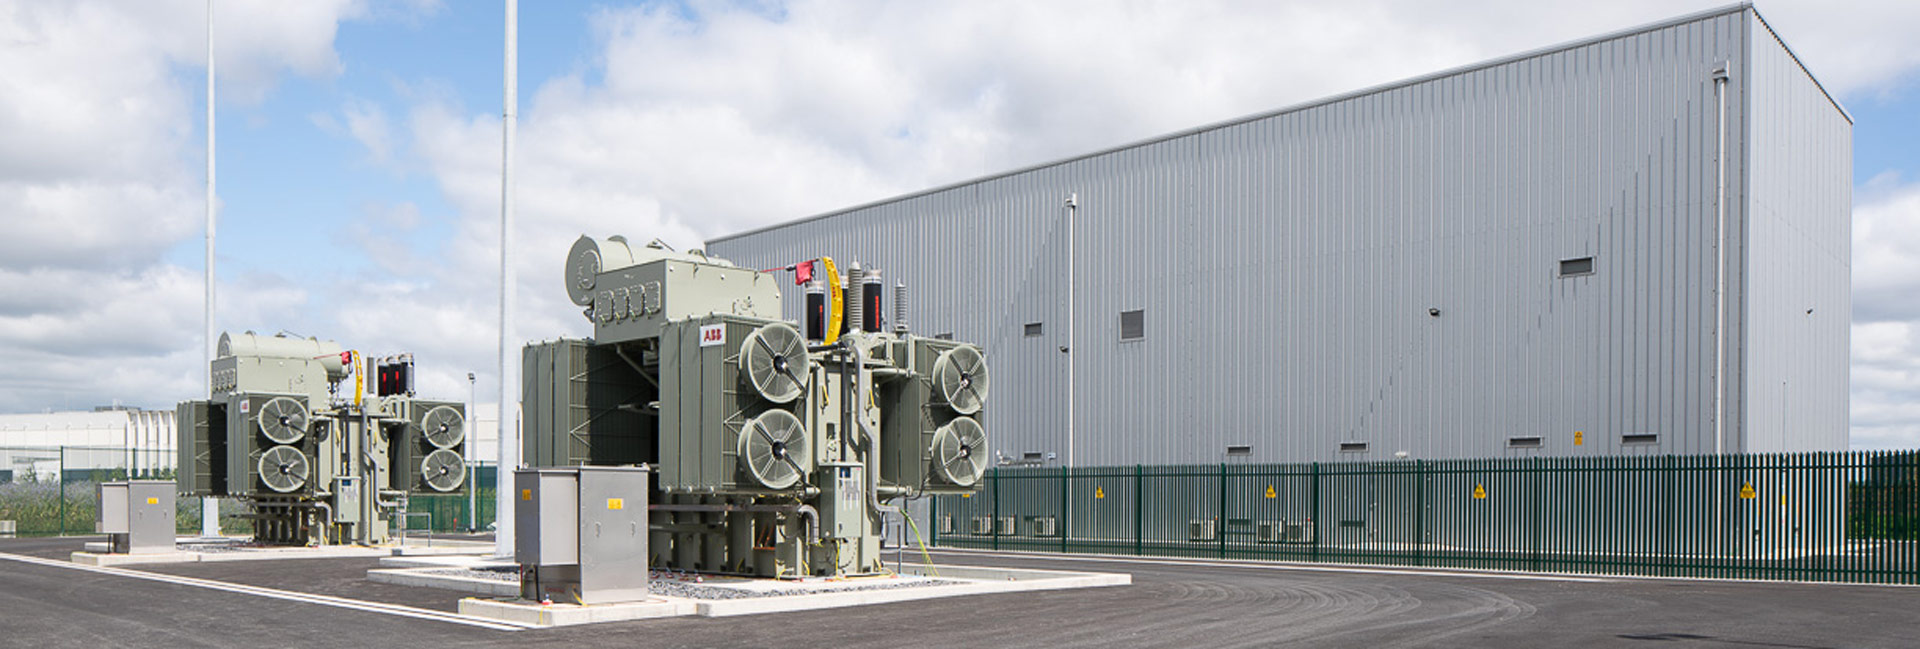 The Aungierstown Substation is a 110kV, 80MVa, Gas Insulated Switchgear (GIS) facility located in Grange Castle Business Park, Dublin 22.